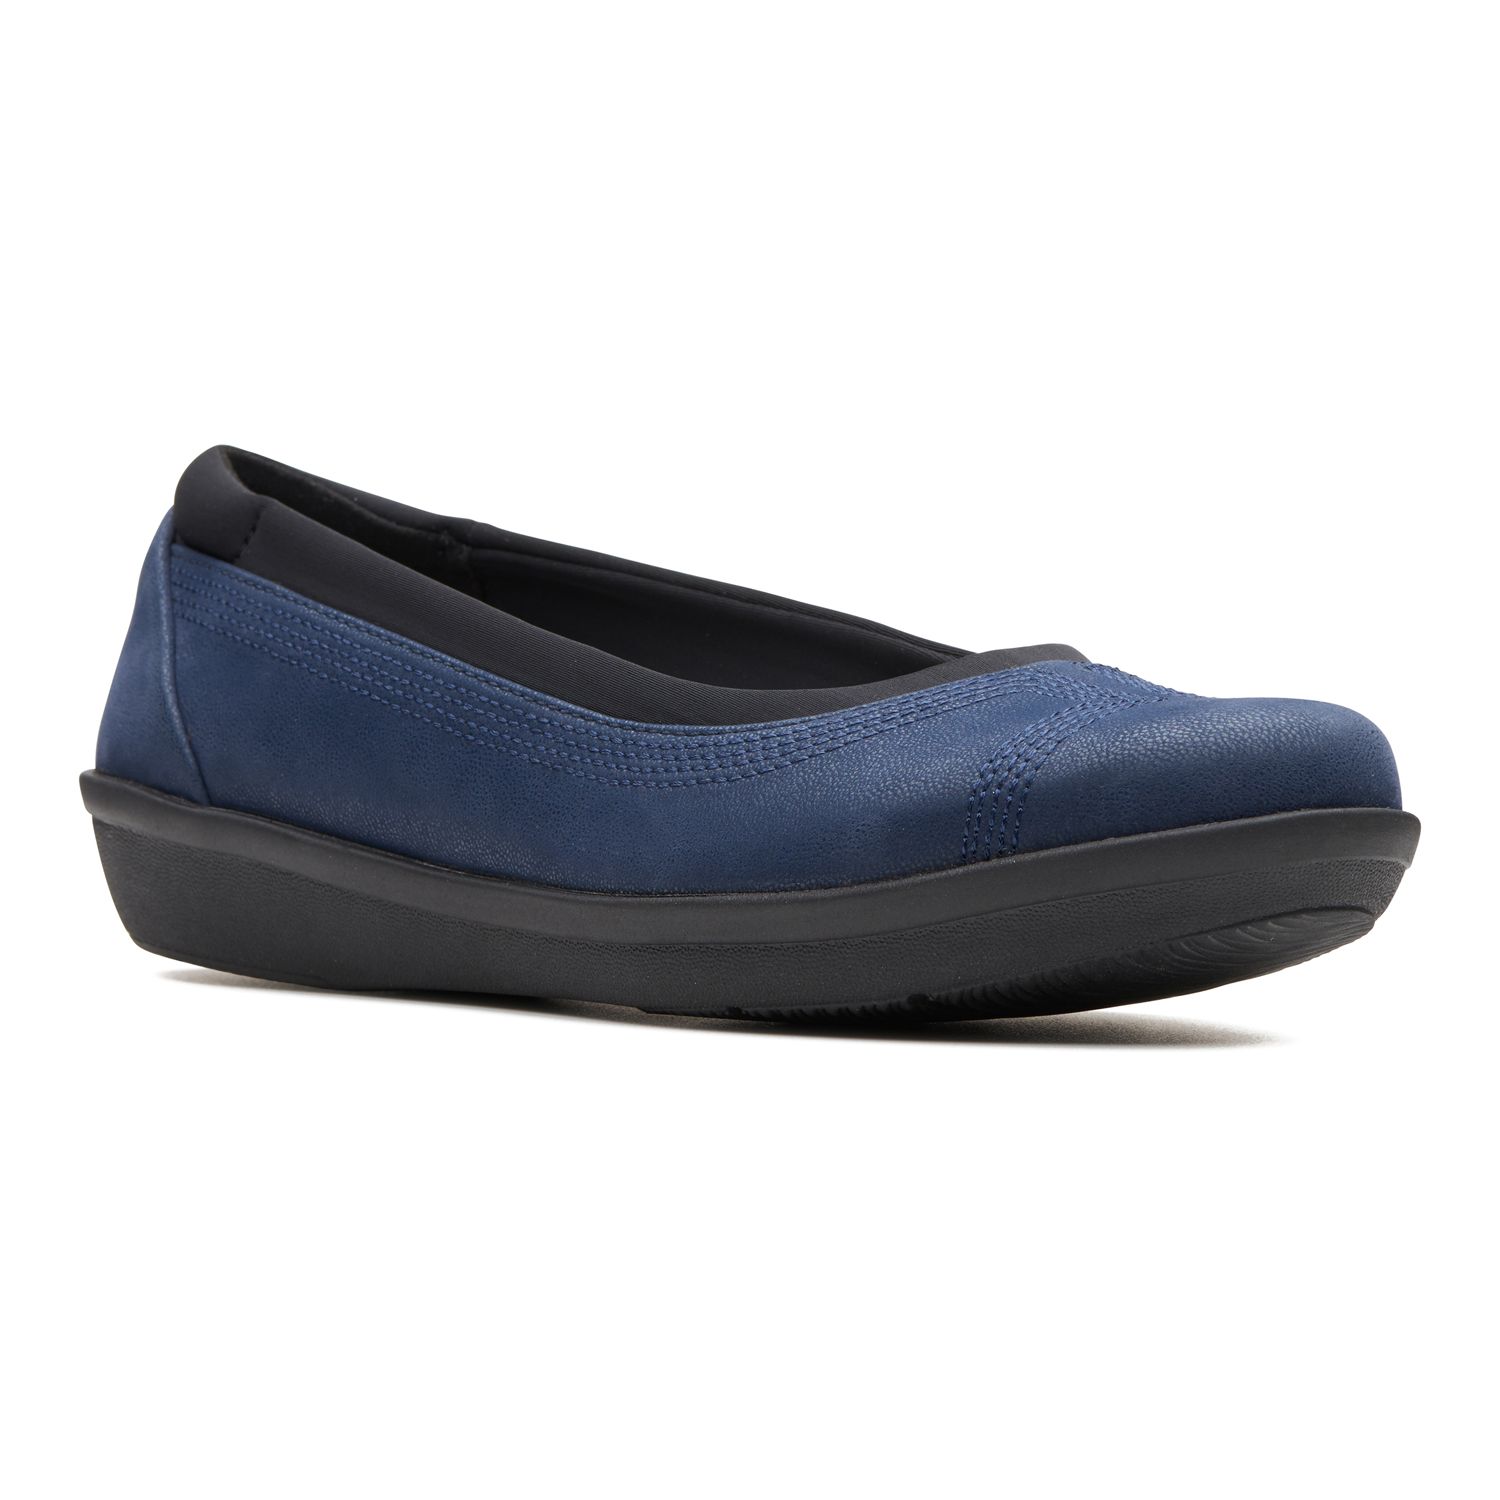 clarks shoes clearance